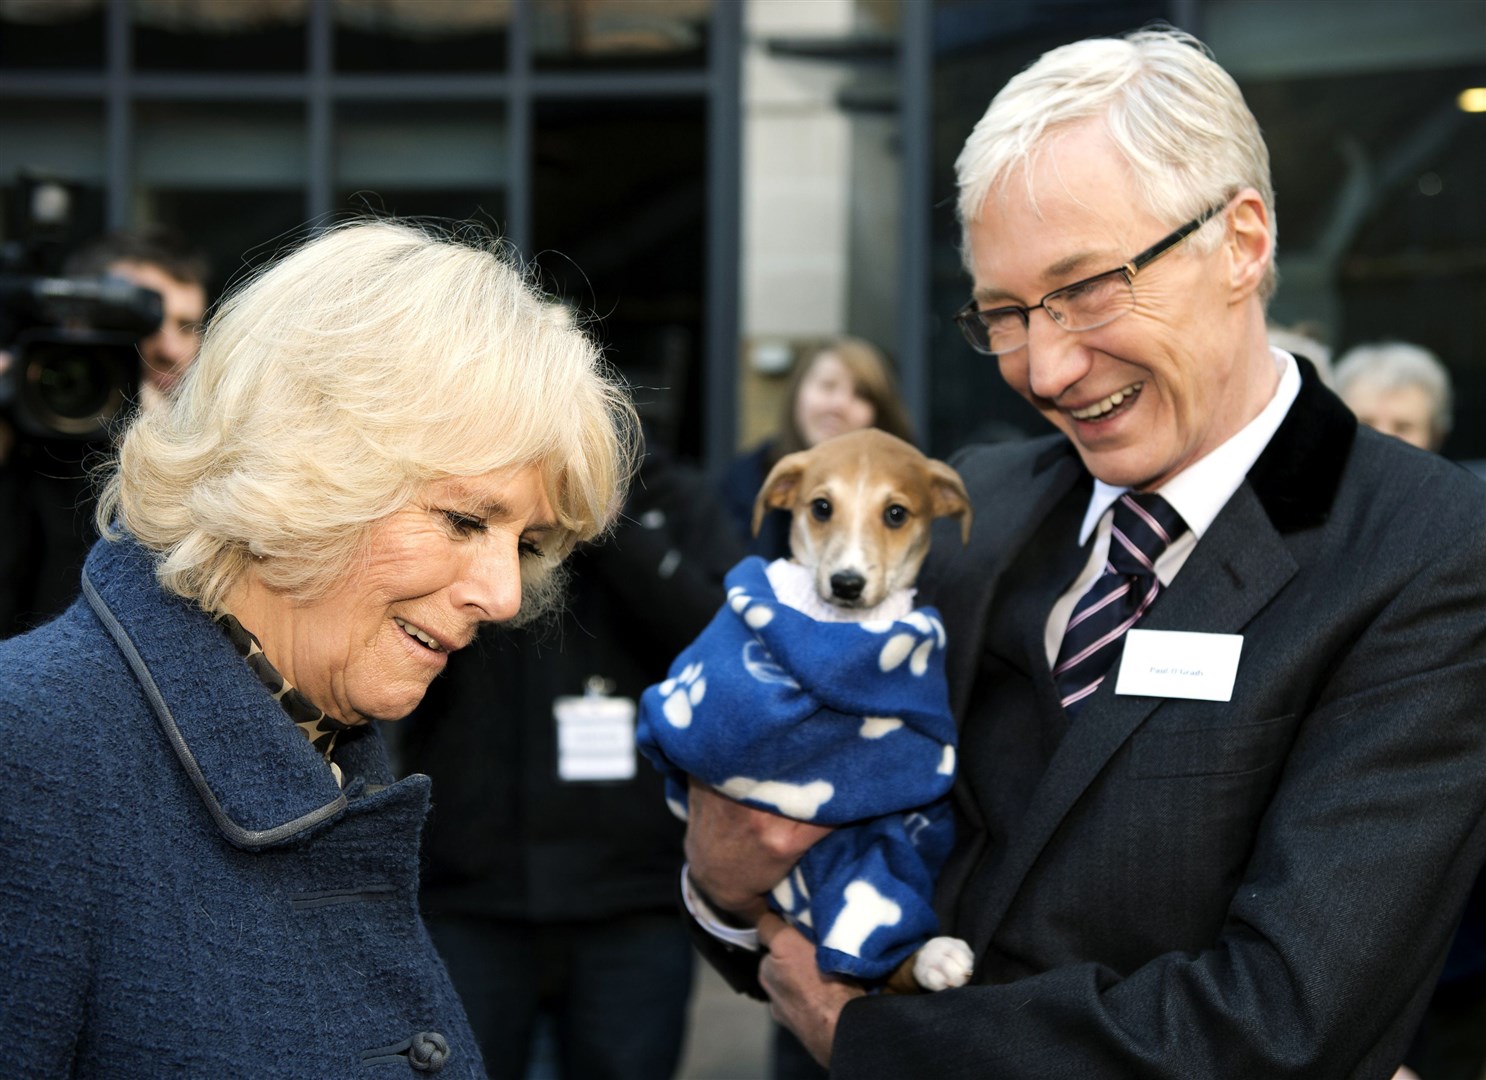 Paul O’Grady with the Queen Consort, then the Duchess of Cornwall, during a visit to Battersea Dogs and Cats Home in London in 2012 (Adrian Dennnis/PA)